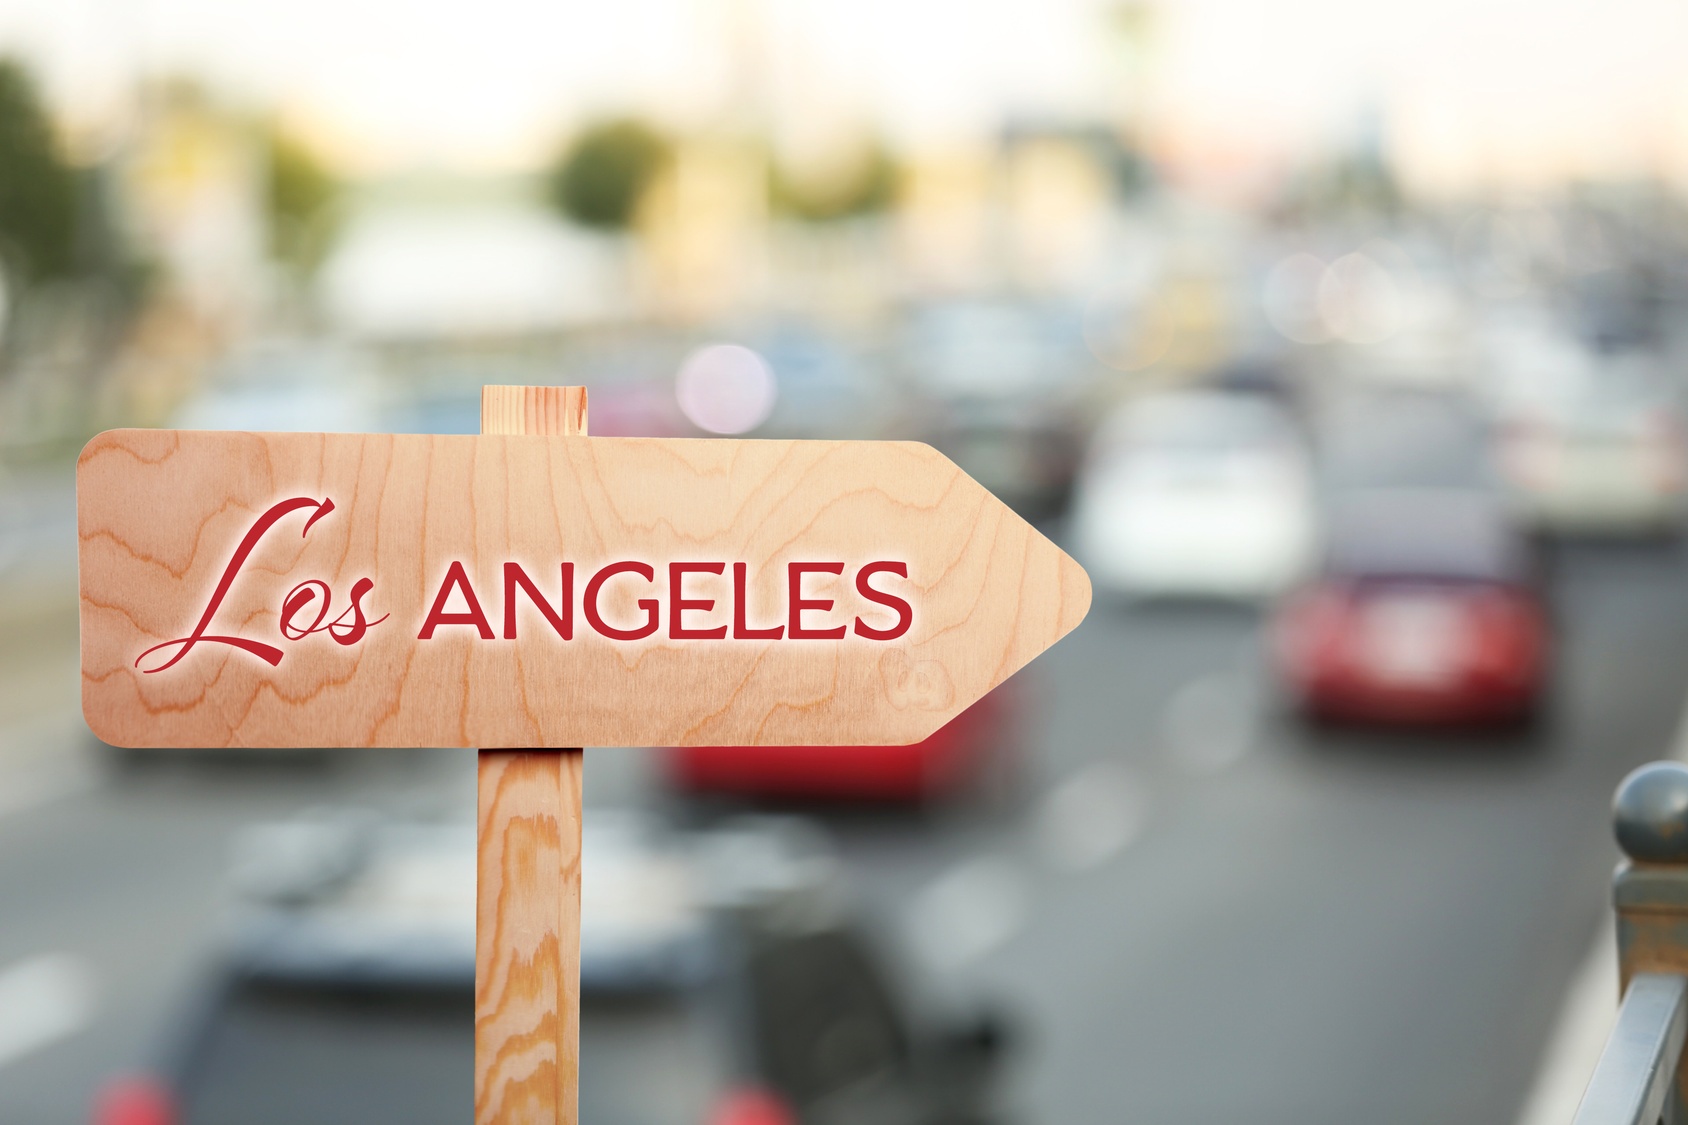 3 Reasons To Work With A Local Los Angeles Advertising Agency